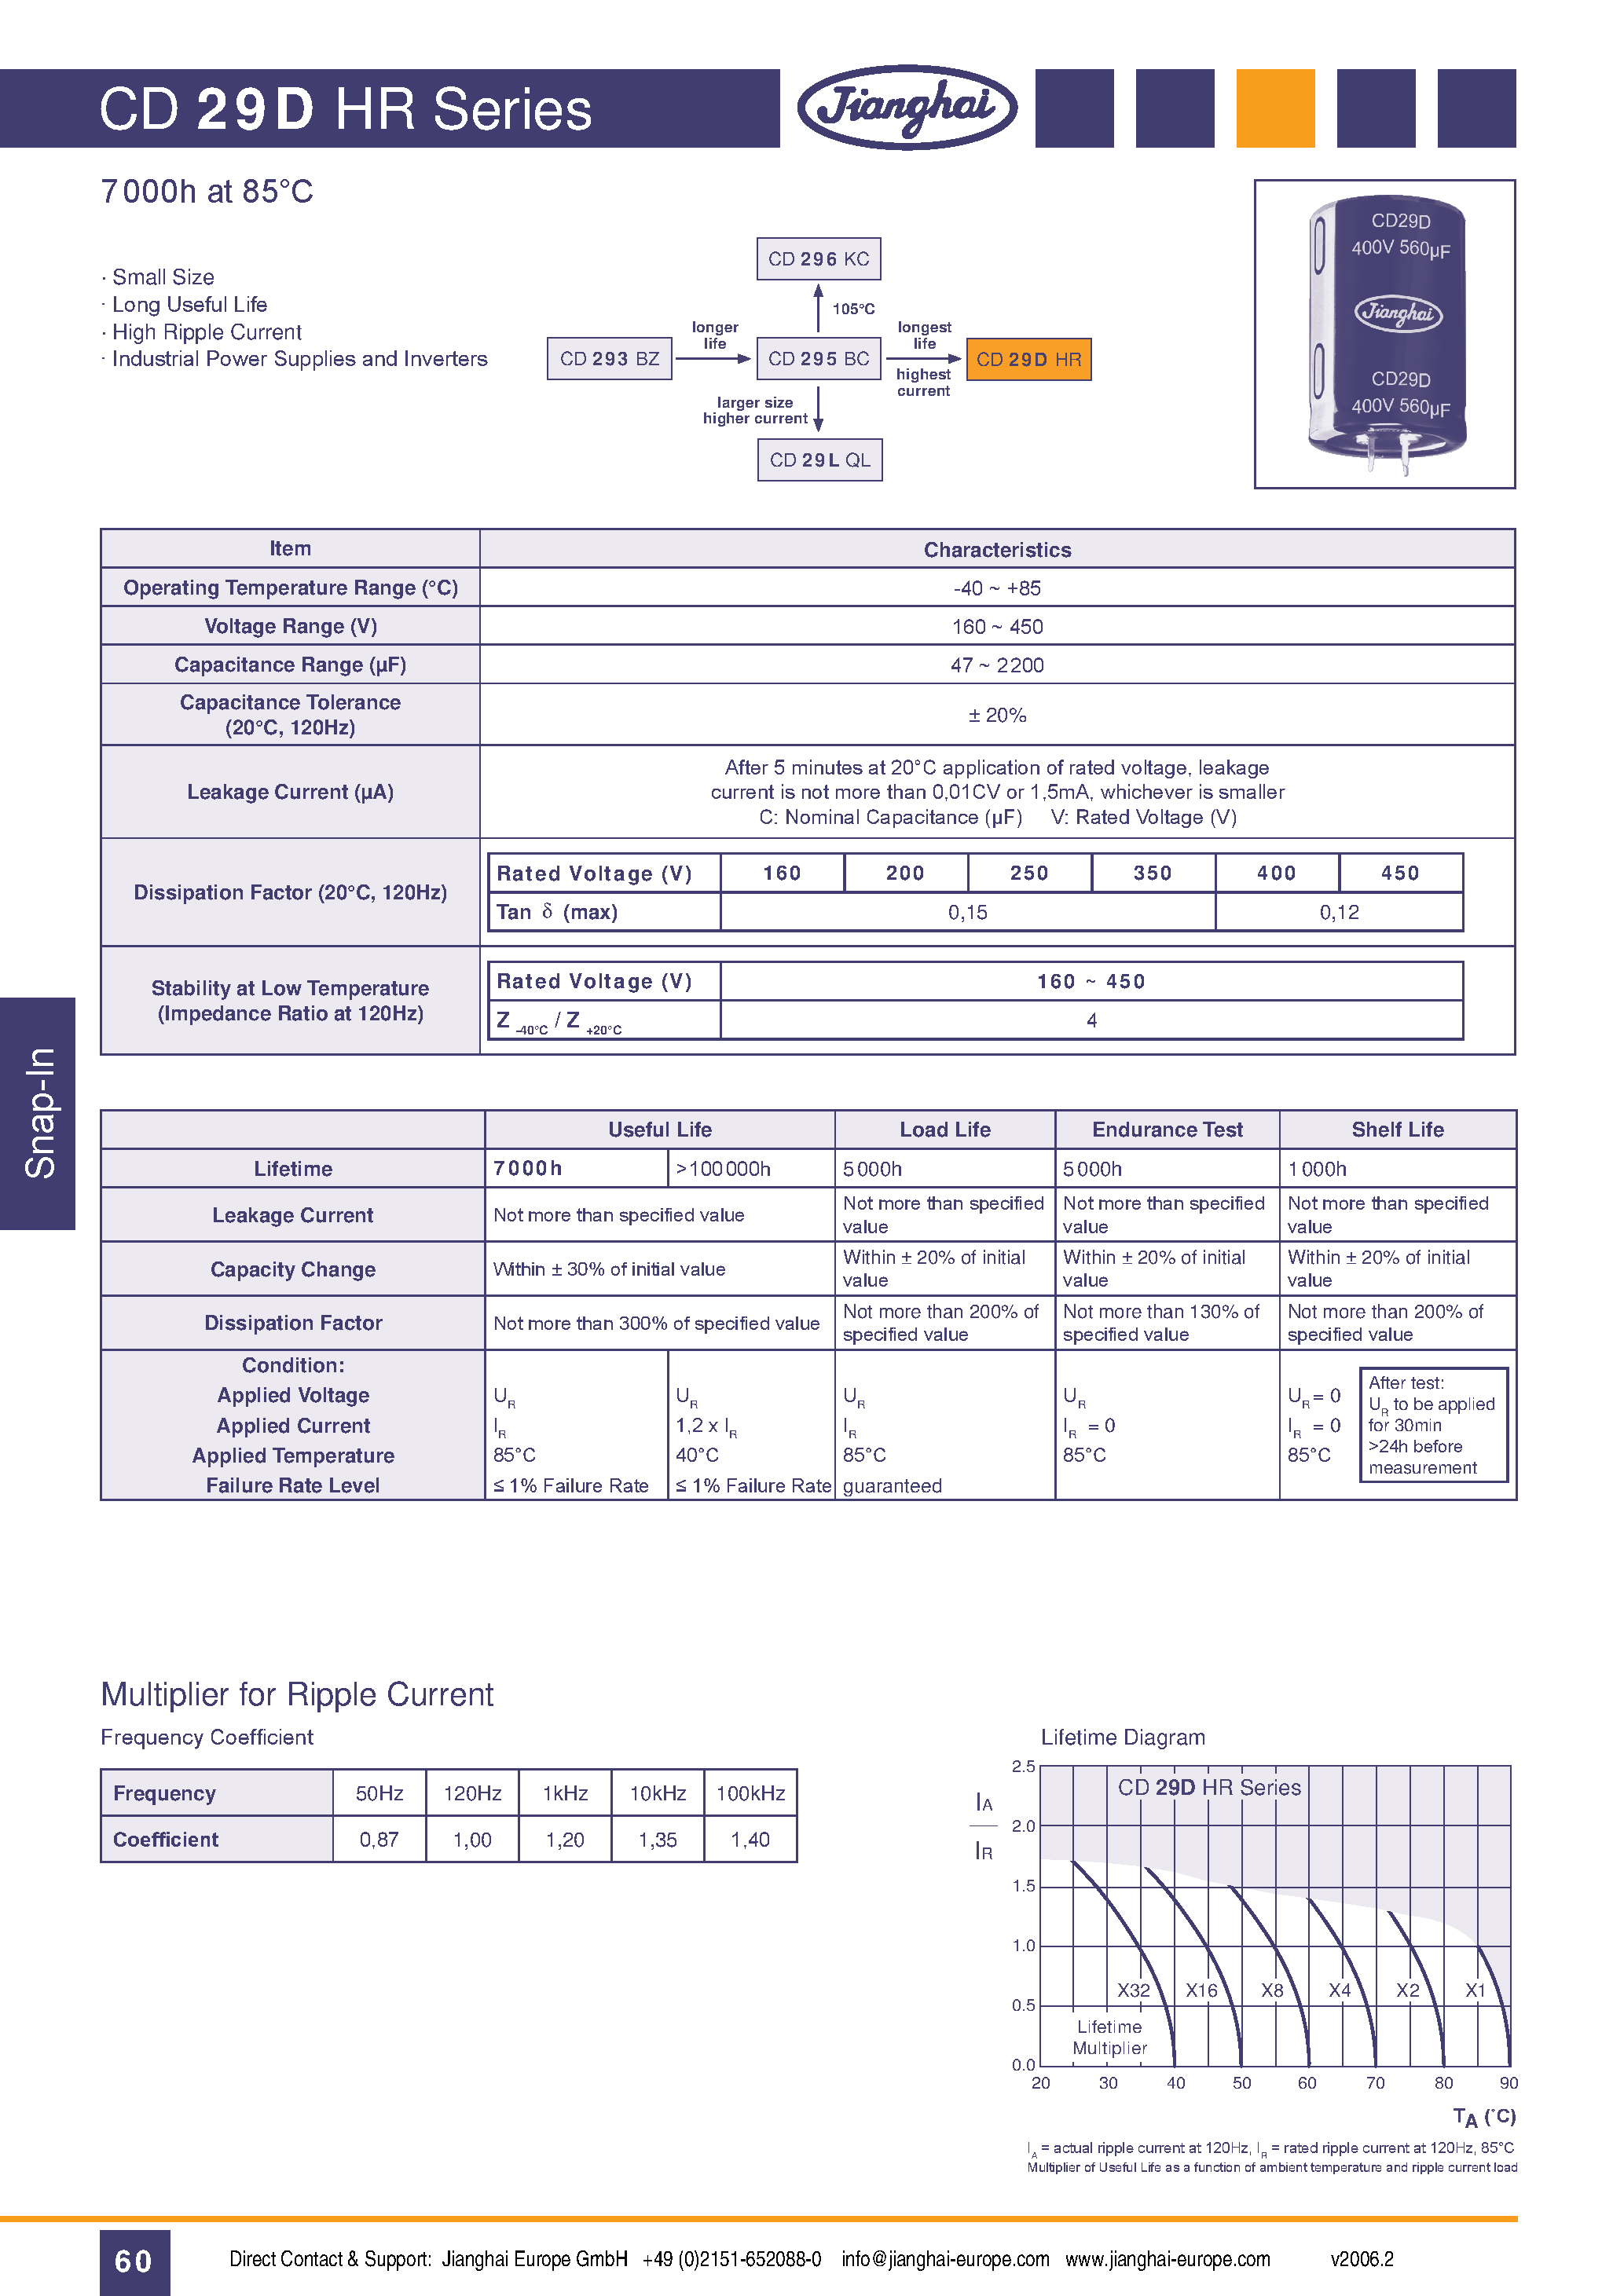 Datasheet CD29DHR - Small Size Long Useful Life High Ripple Current Industrial Power Supplies and Inverters page 1